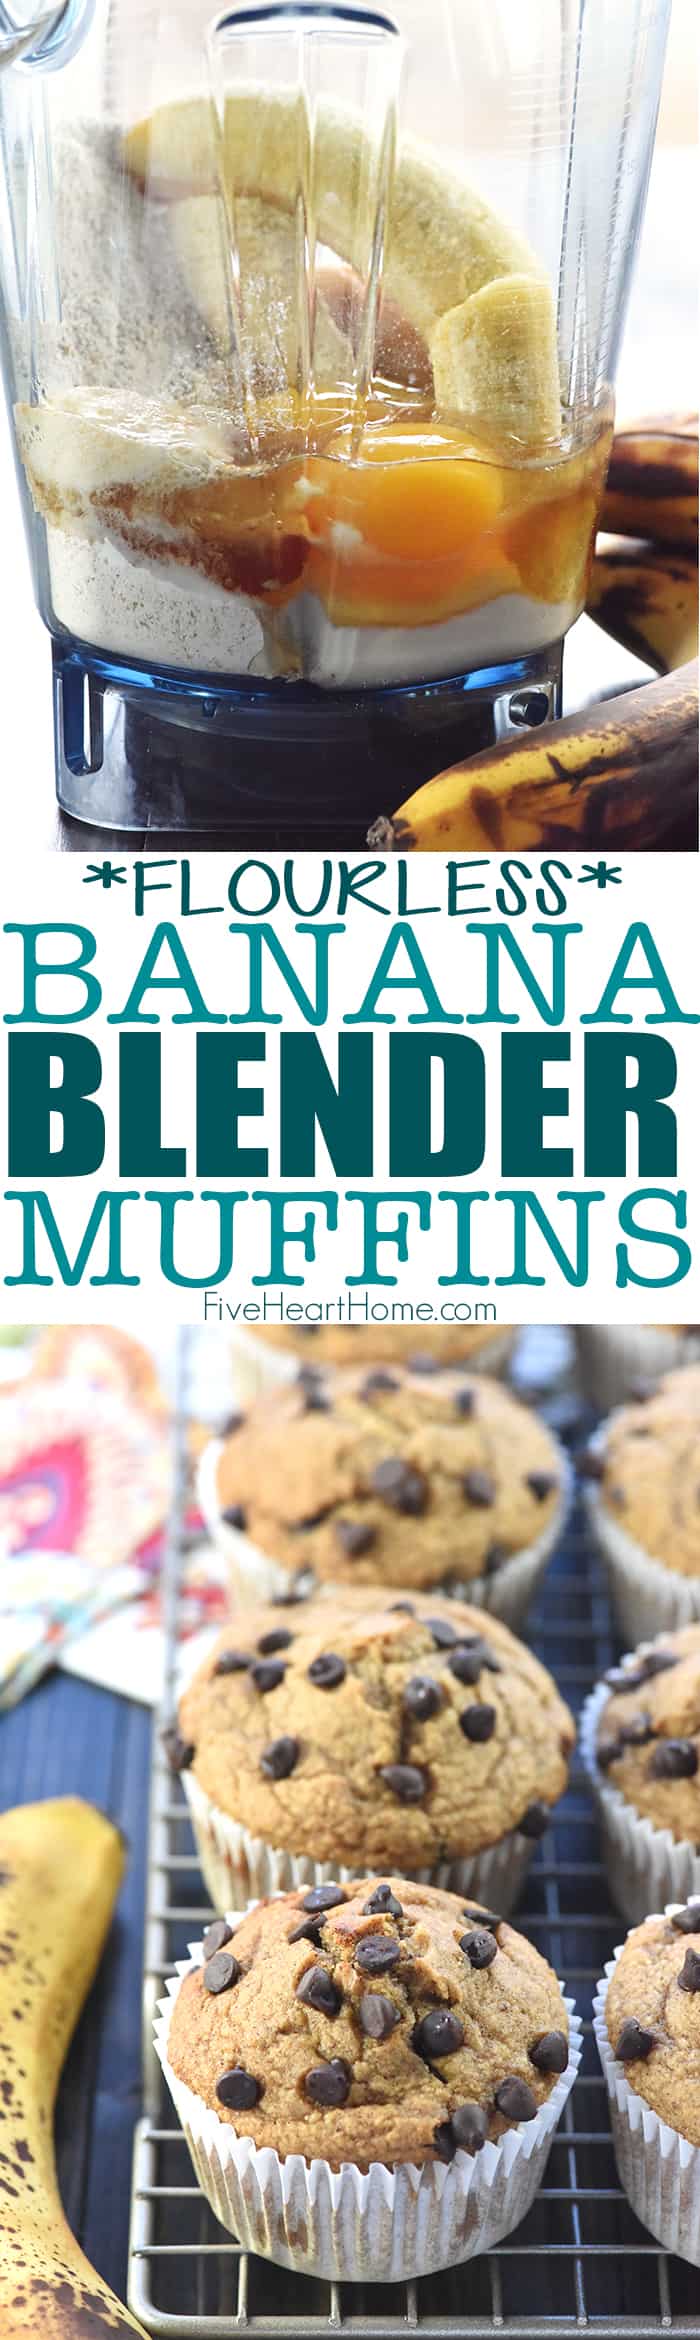 Flourless Banana Blender Muffins ~ these healthy, naturally sweetened muffins include oats, Greek yogurt, and honey in a batter that effortlessly comes together in the blender! | FiveHeartHome.com via @fivehearthome